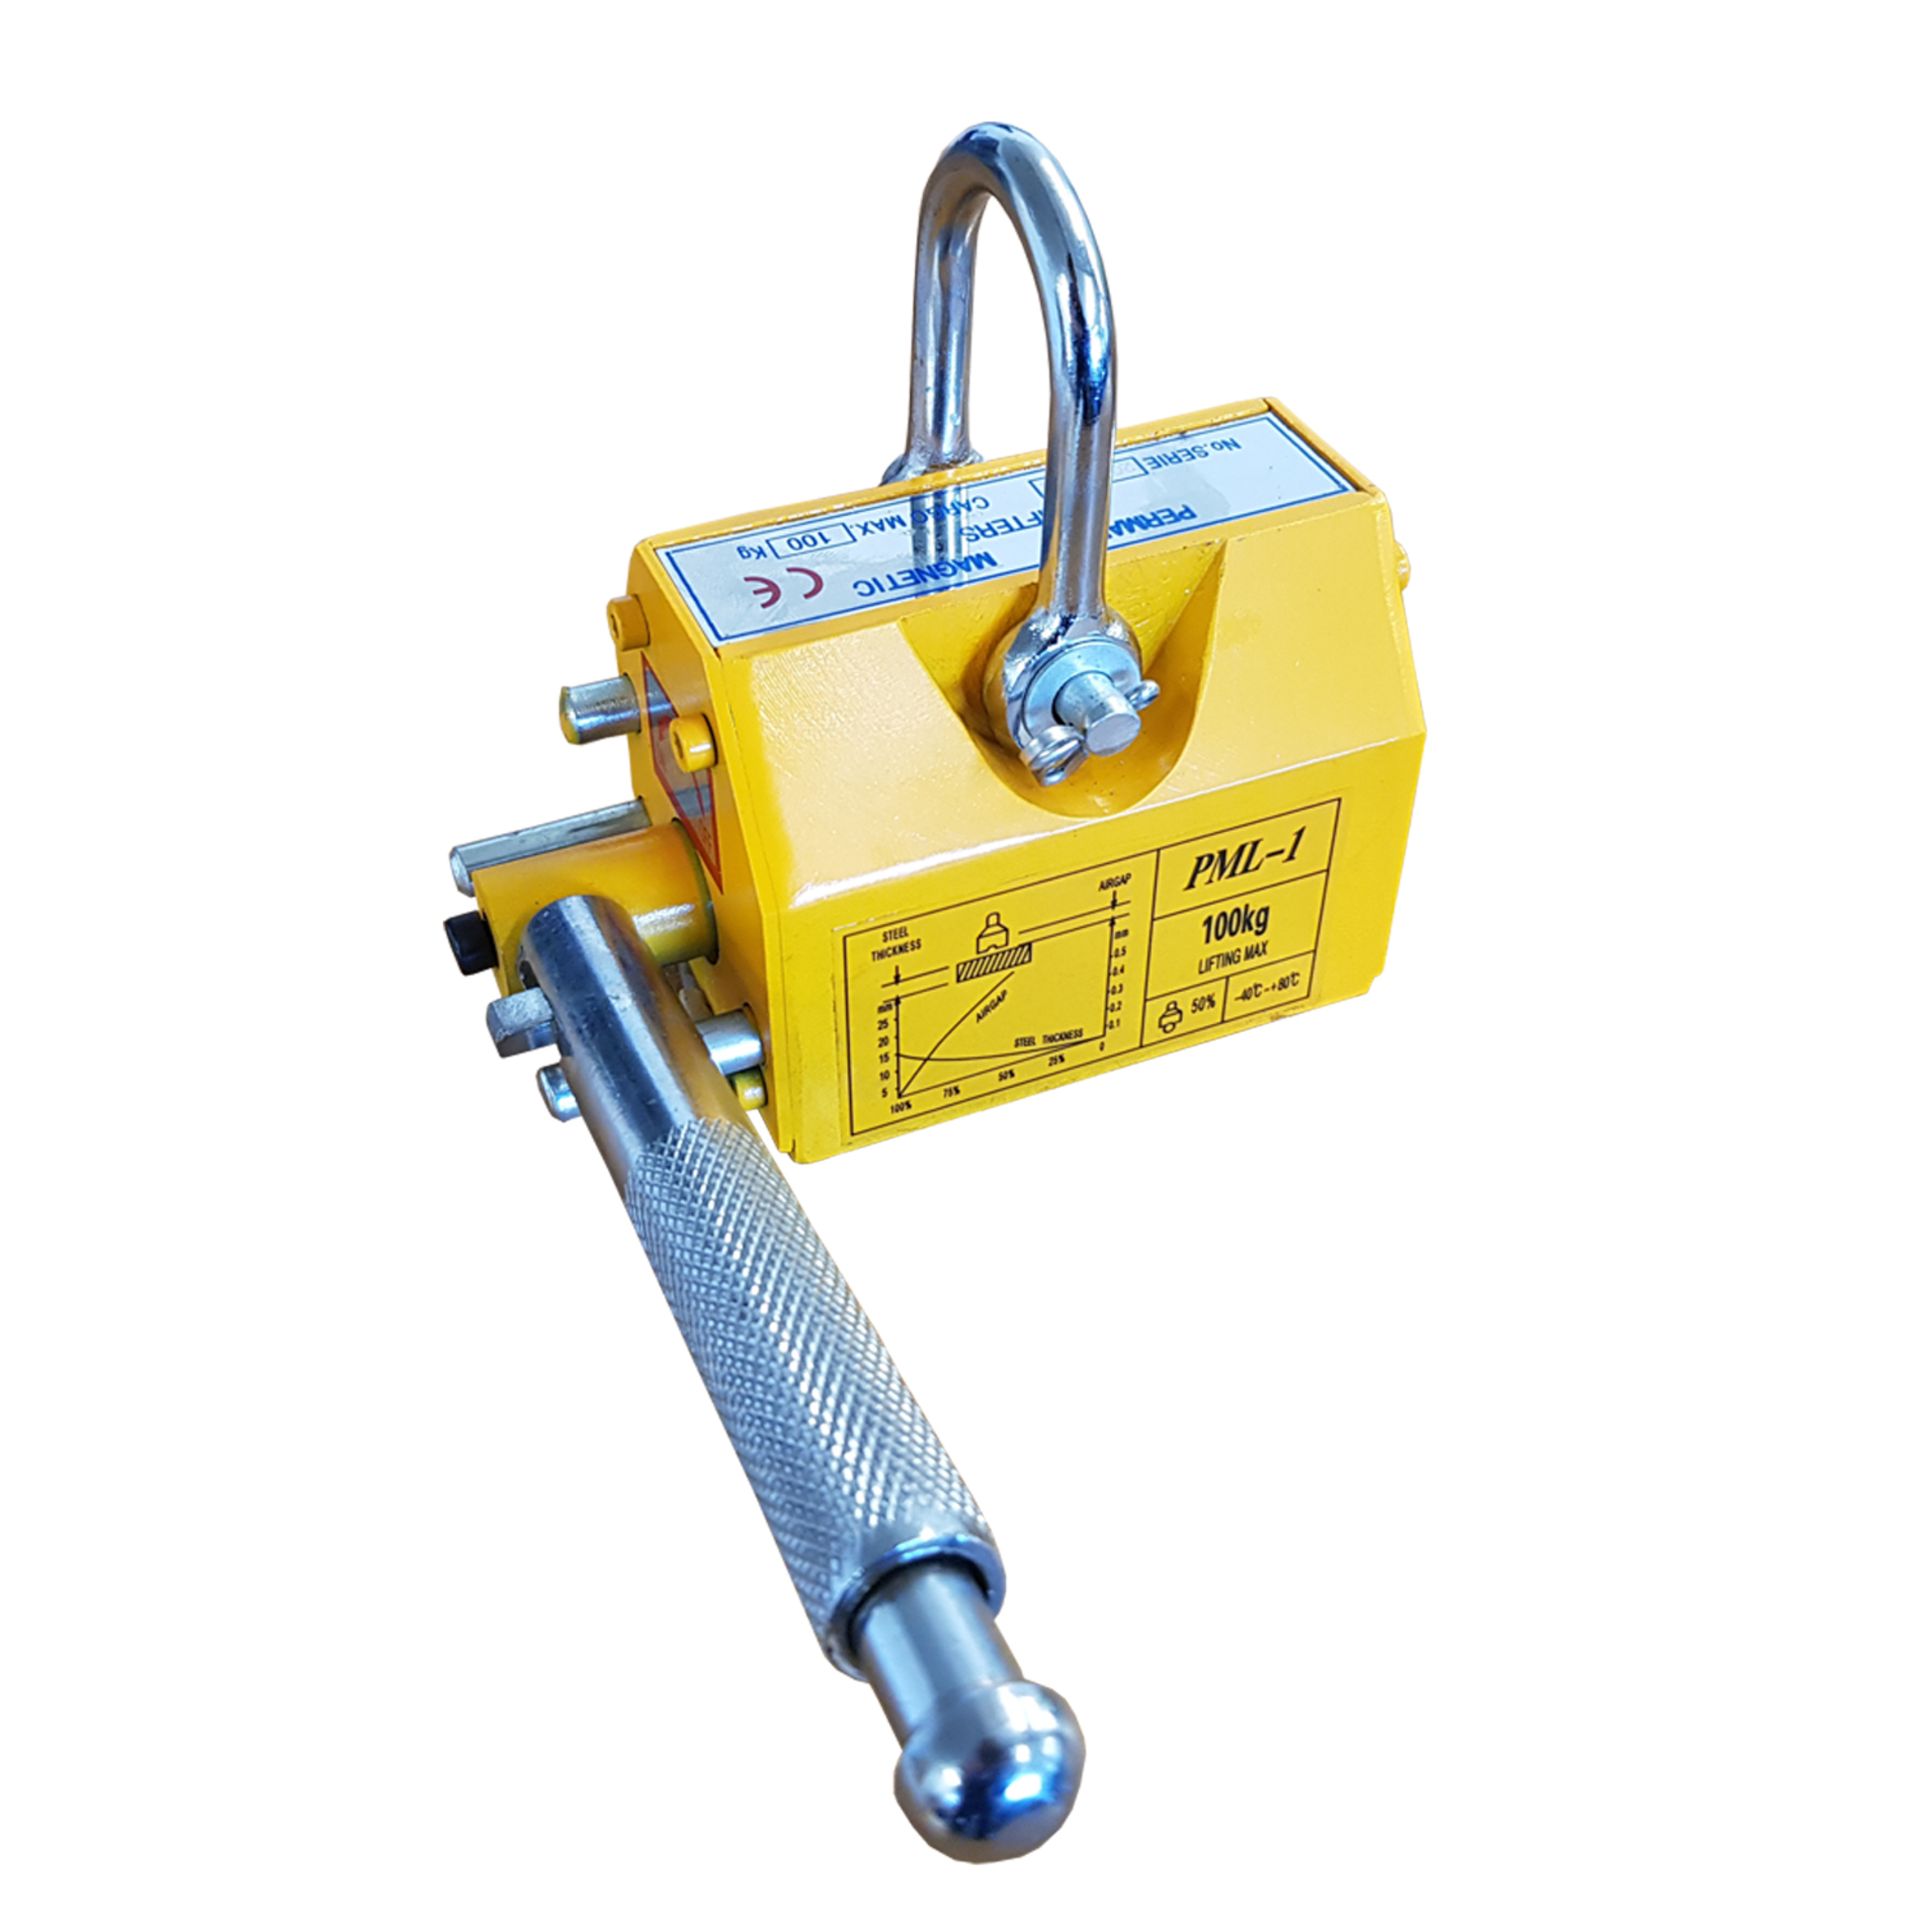 1 x 1000KGS LIFTING MAGNET WITH SHACKLE (ZZDMLM1000)